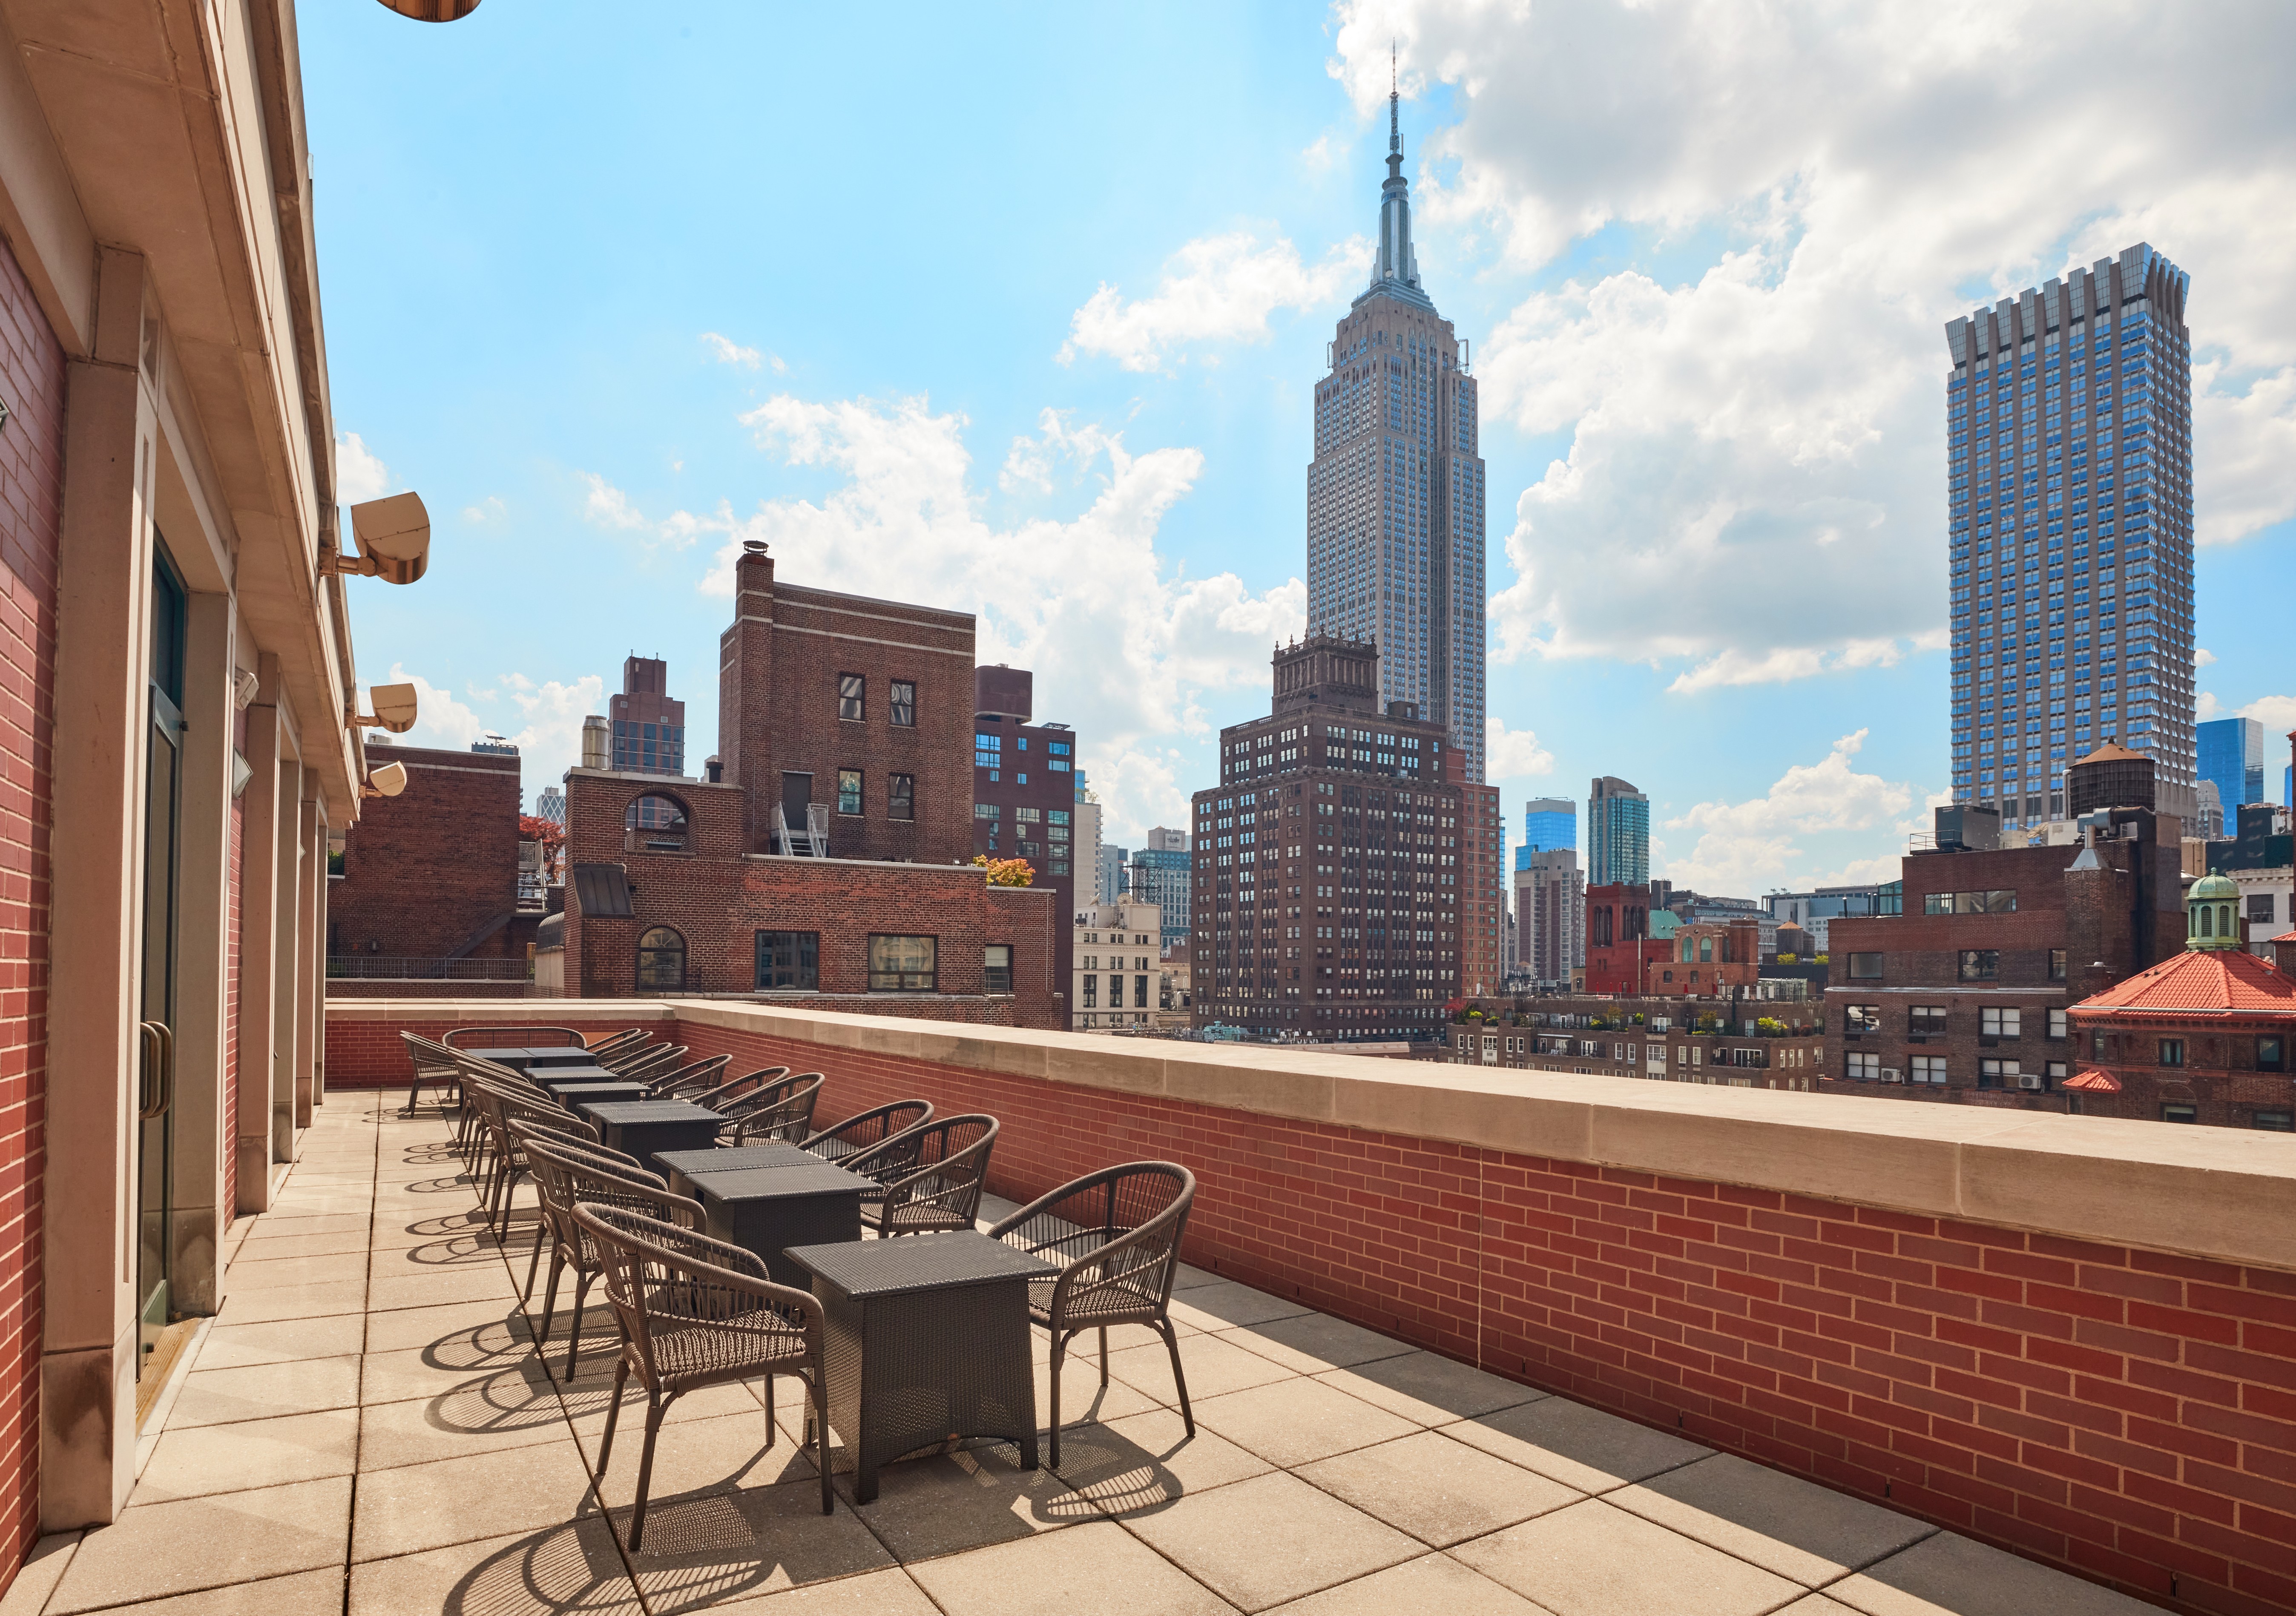 A Brick Patio With Tables And Chairs And A Brick Wall With A City Skyline In The Background